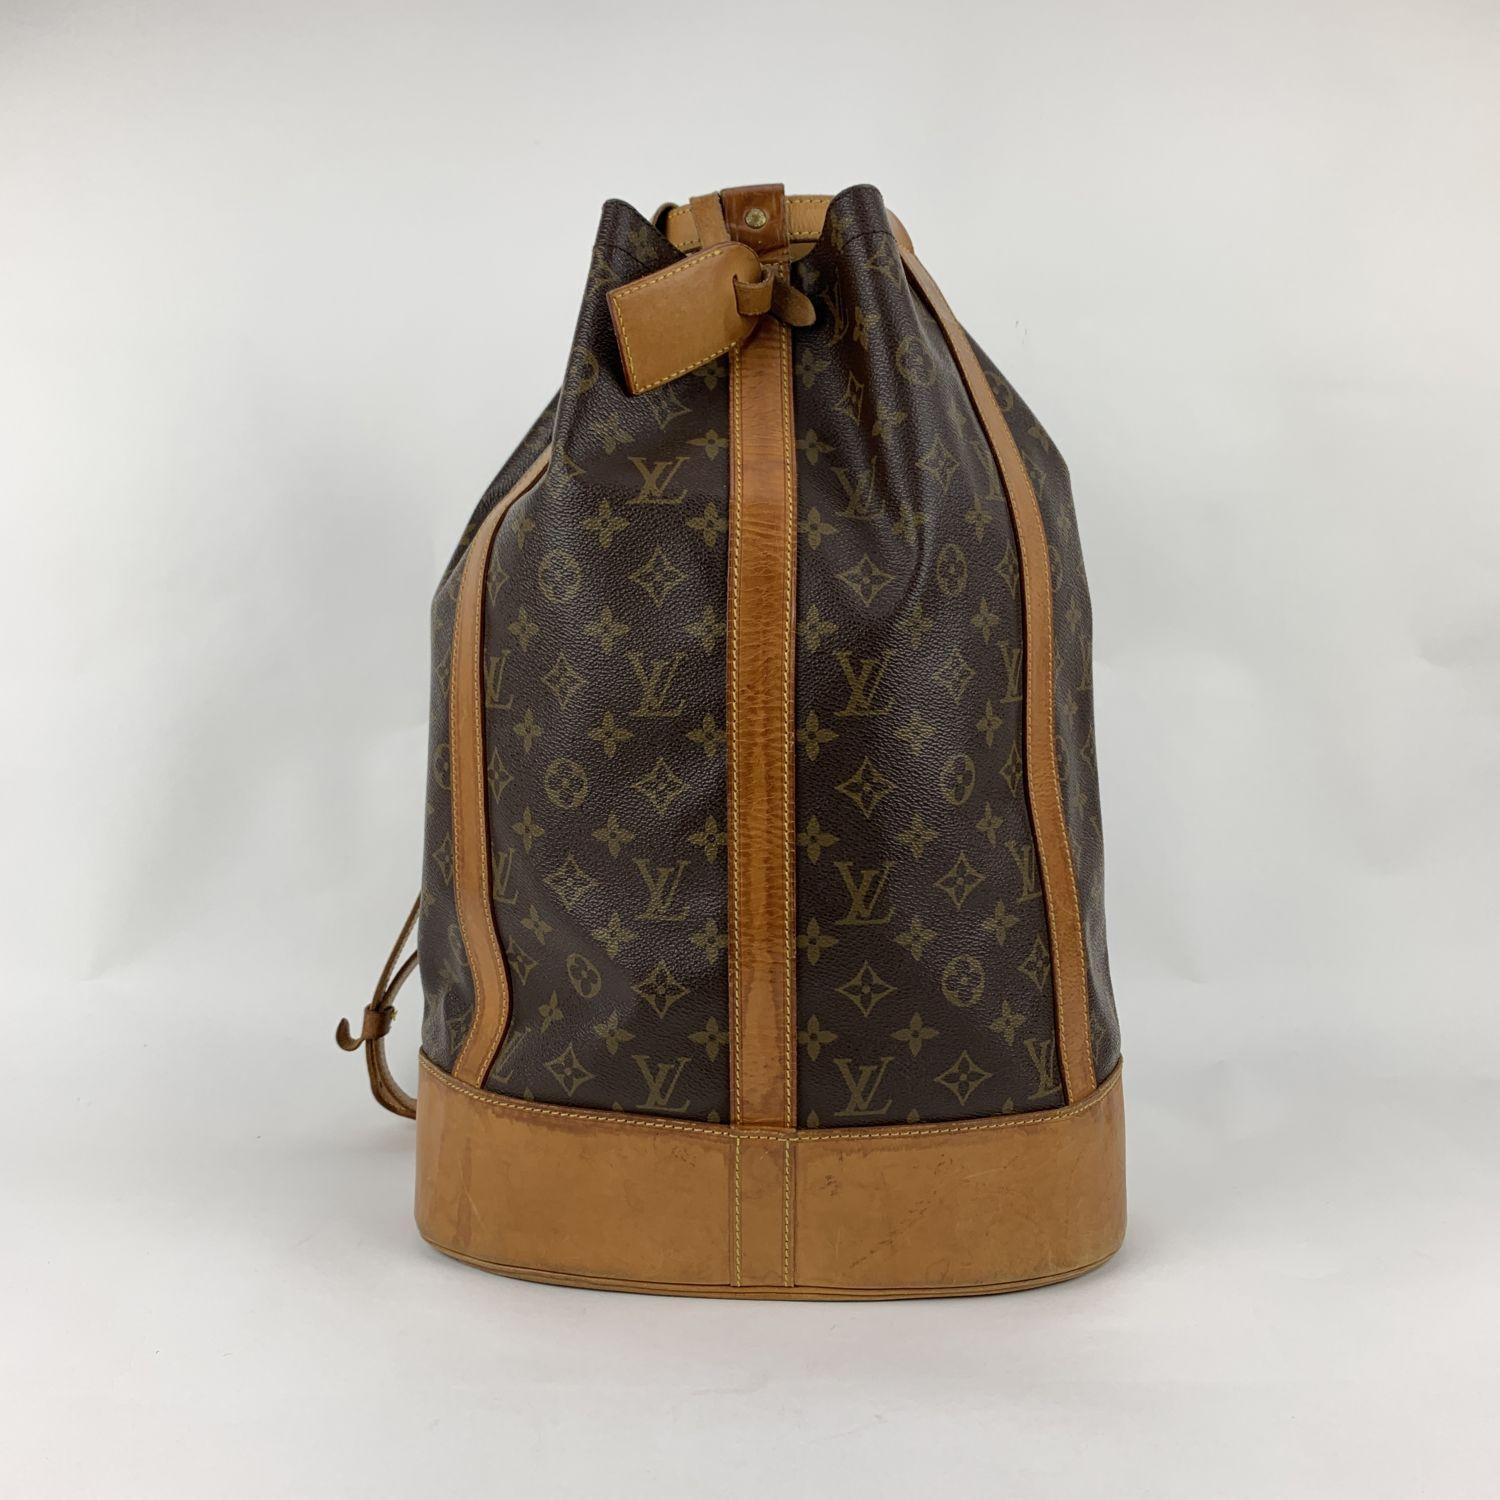 Spacious and sophisticated 'Sac Randonnèe' Shoulder Bag by LOUIS VUITTON, crafted in timeless monogram canvas. This model is discontinued so it is no longer available in stores. The bag features a large main compartment, a removable inner zip pouch